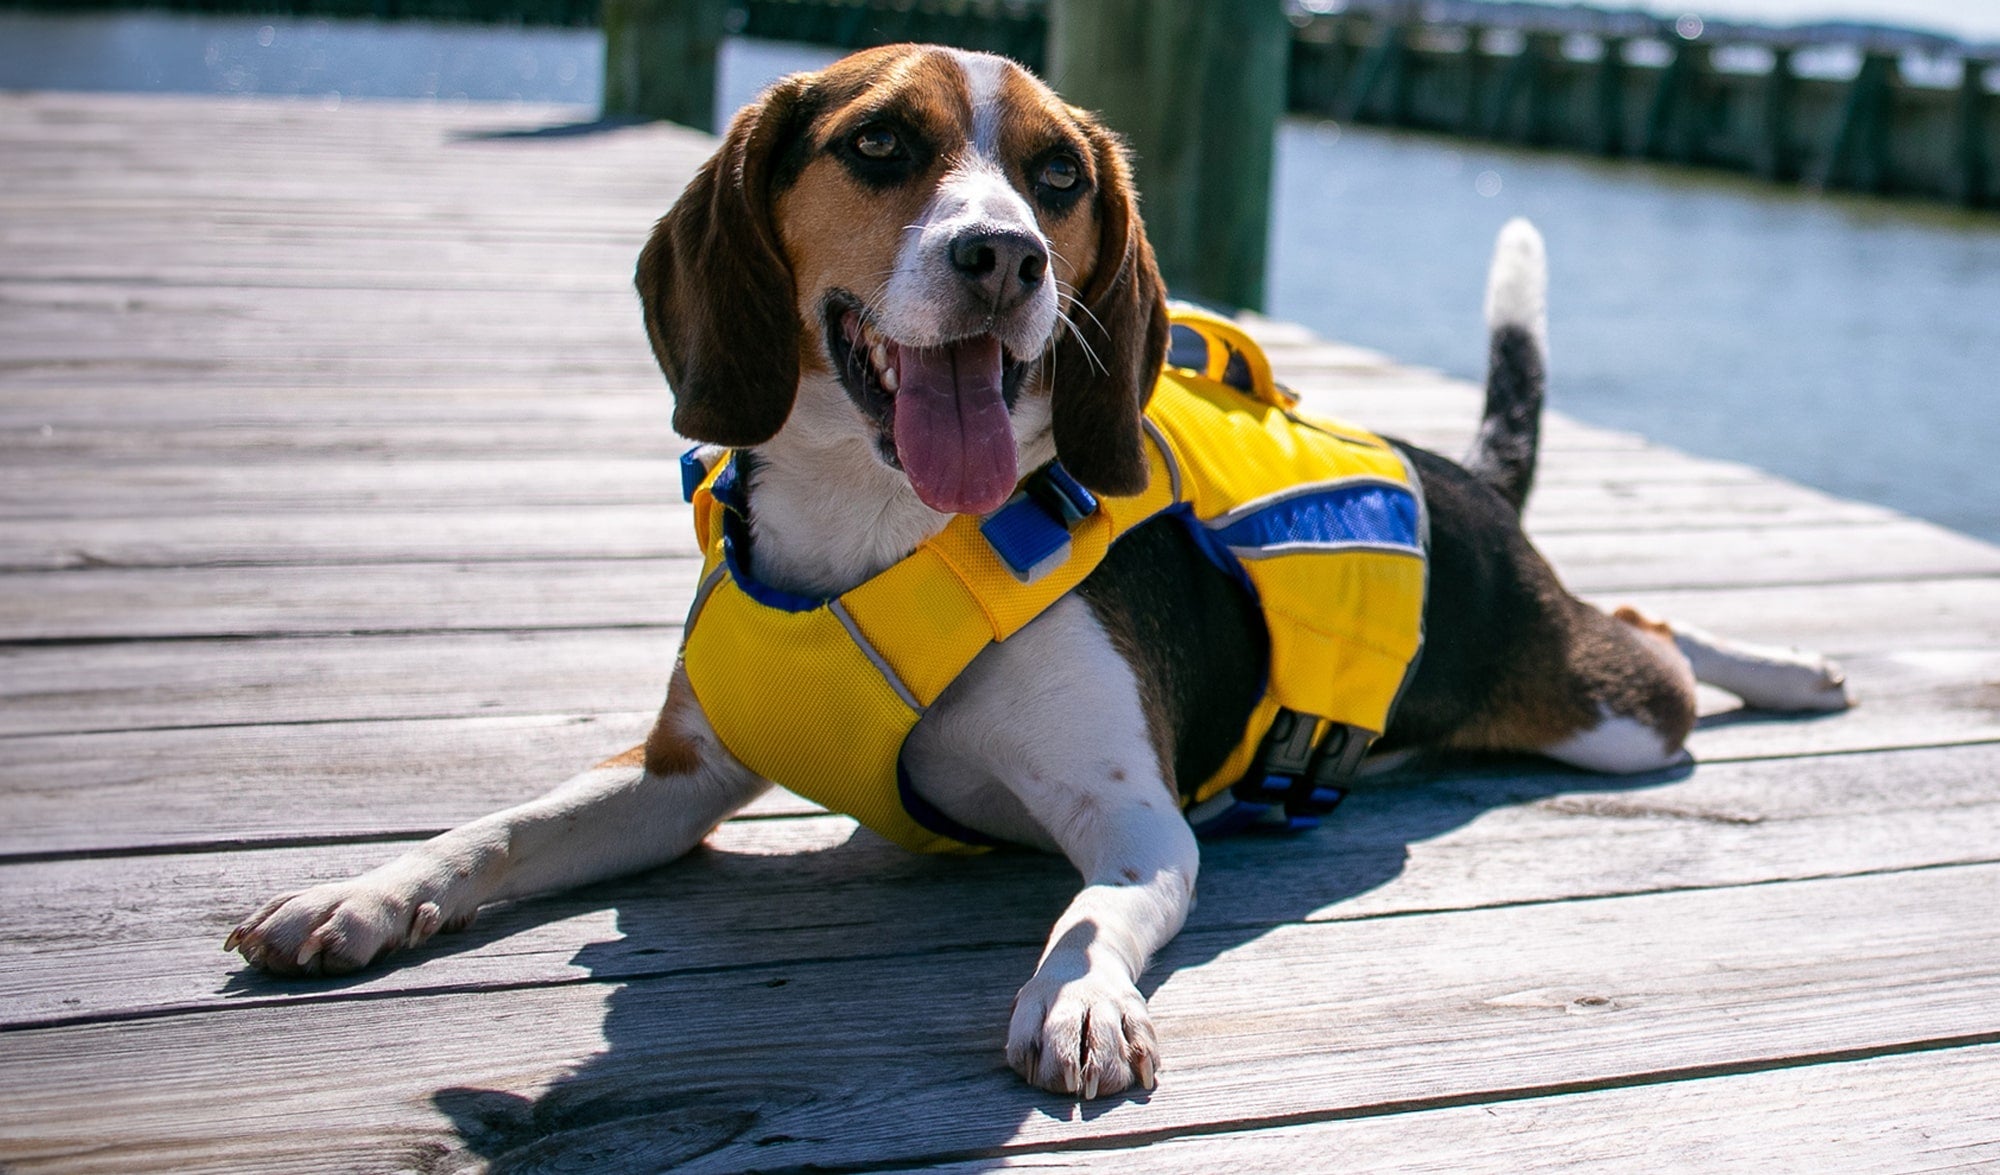 Dog Life Jackets and Dog Outerwear